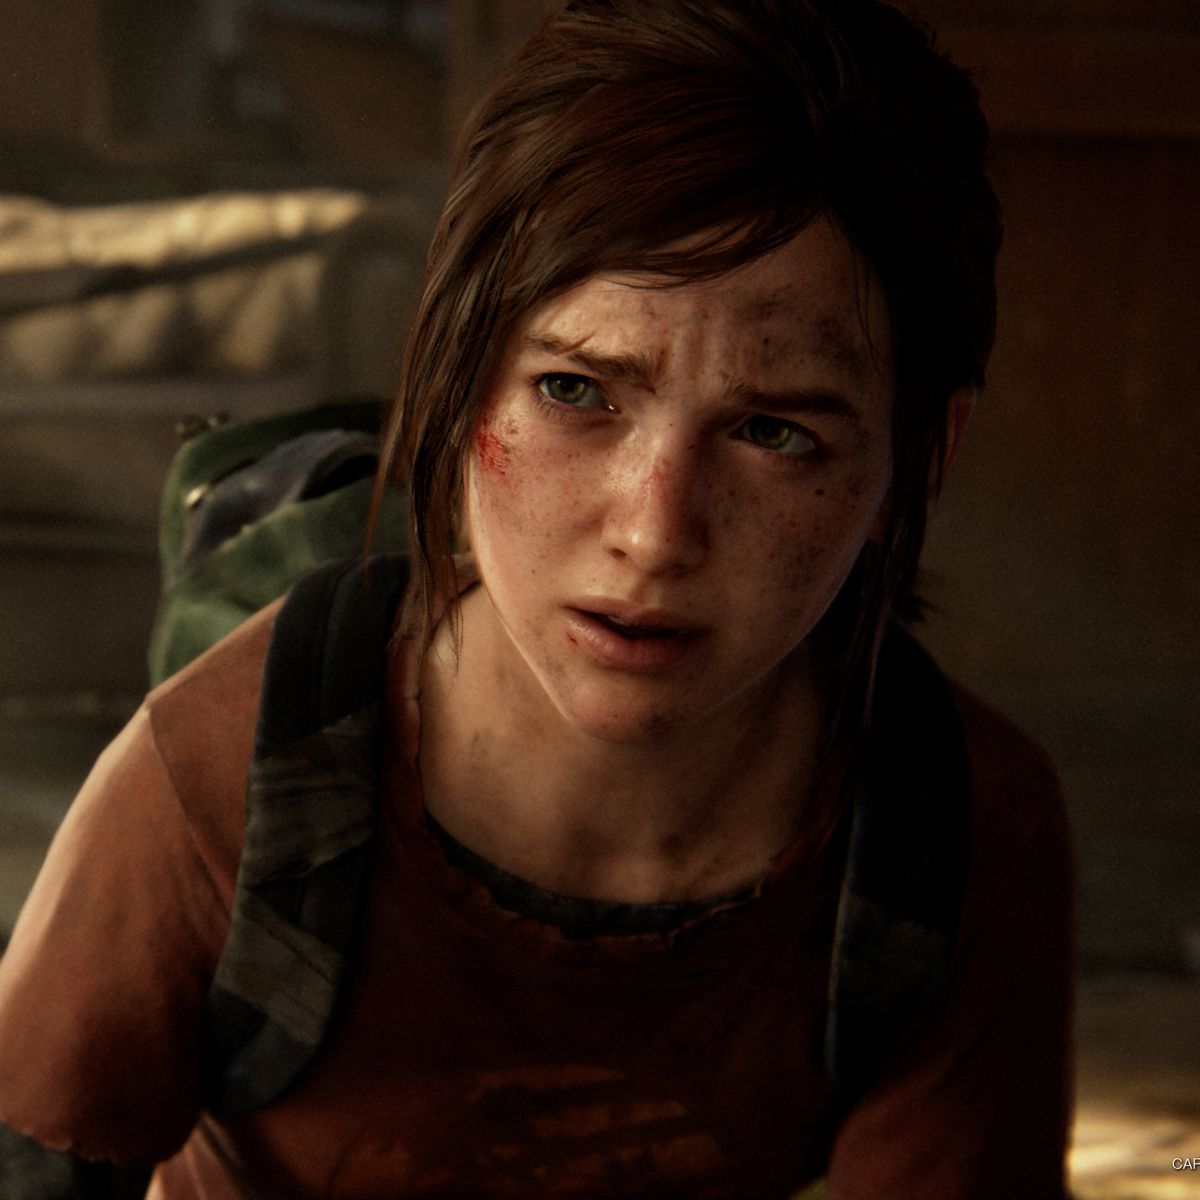 Ellie looks perplexed in a screenshot from The Last of Us Part 1 for PS5